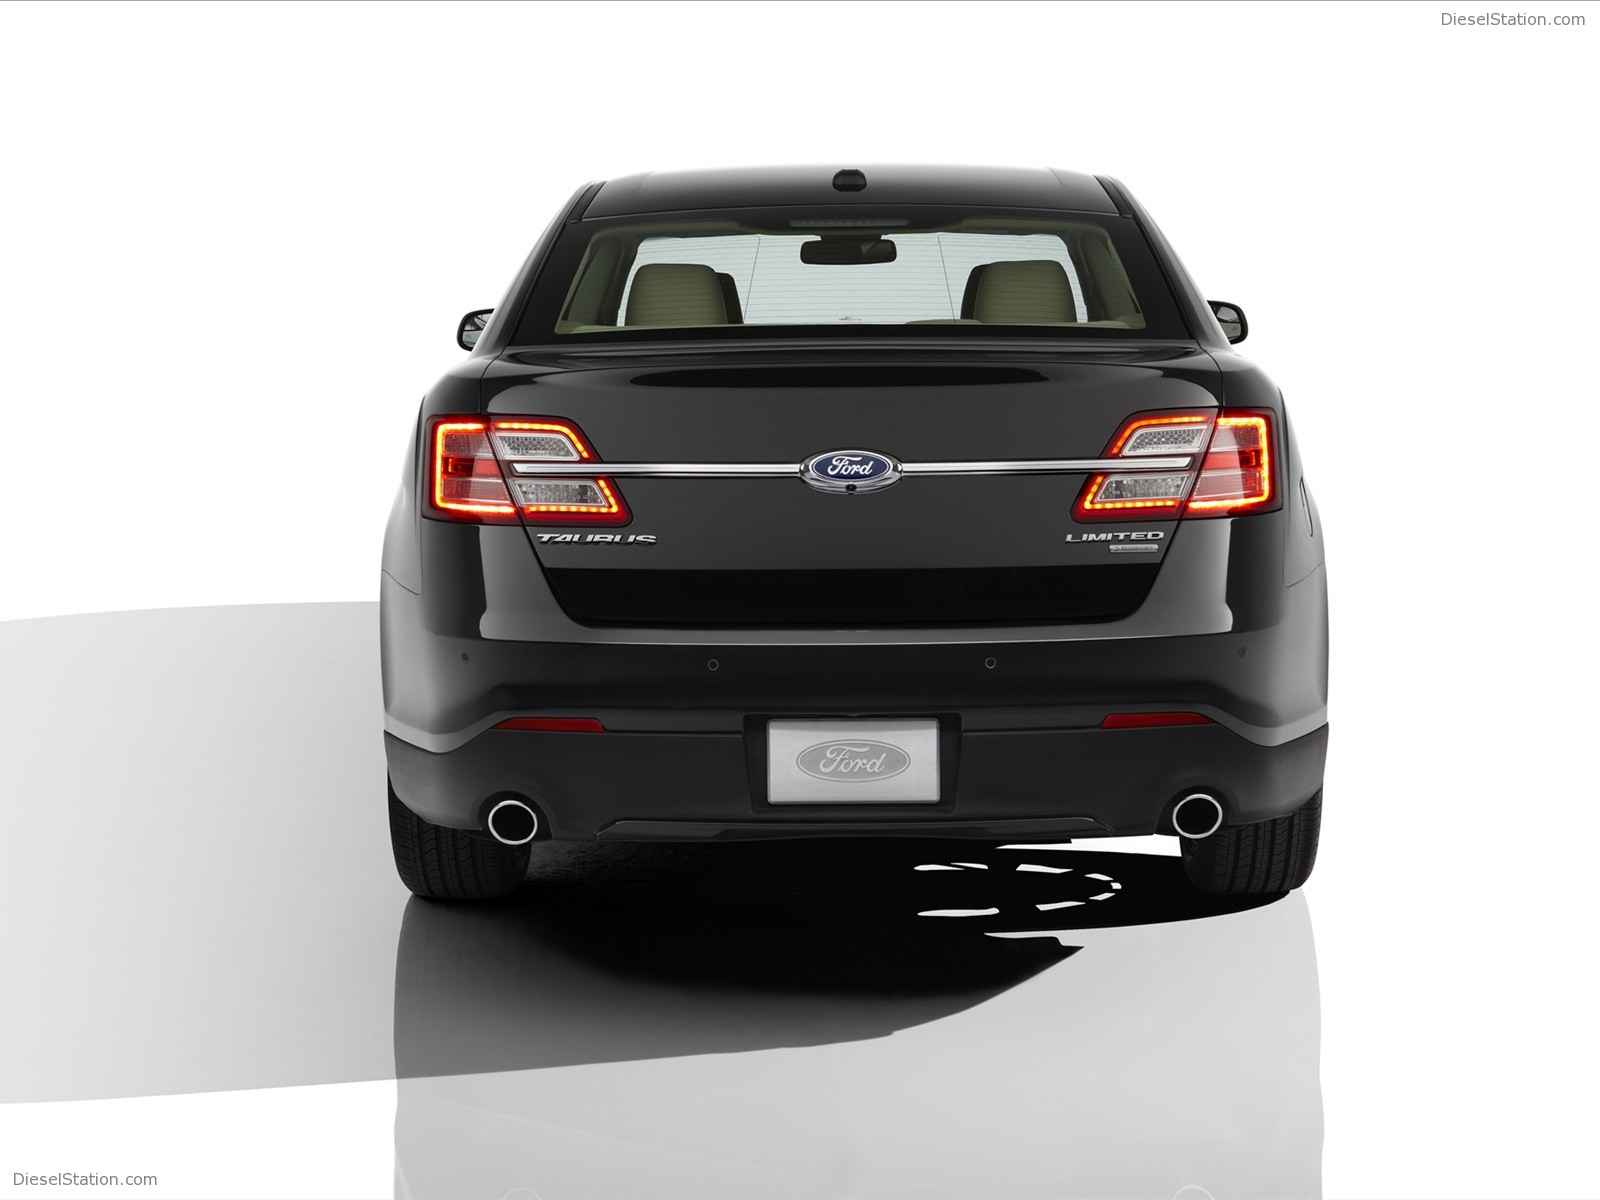 Home > Ford > Ford Taurus 2013